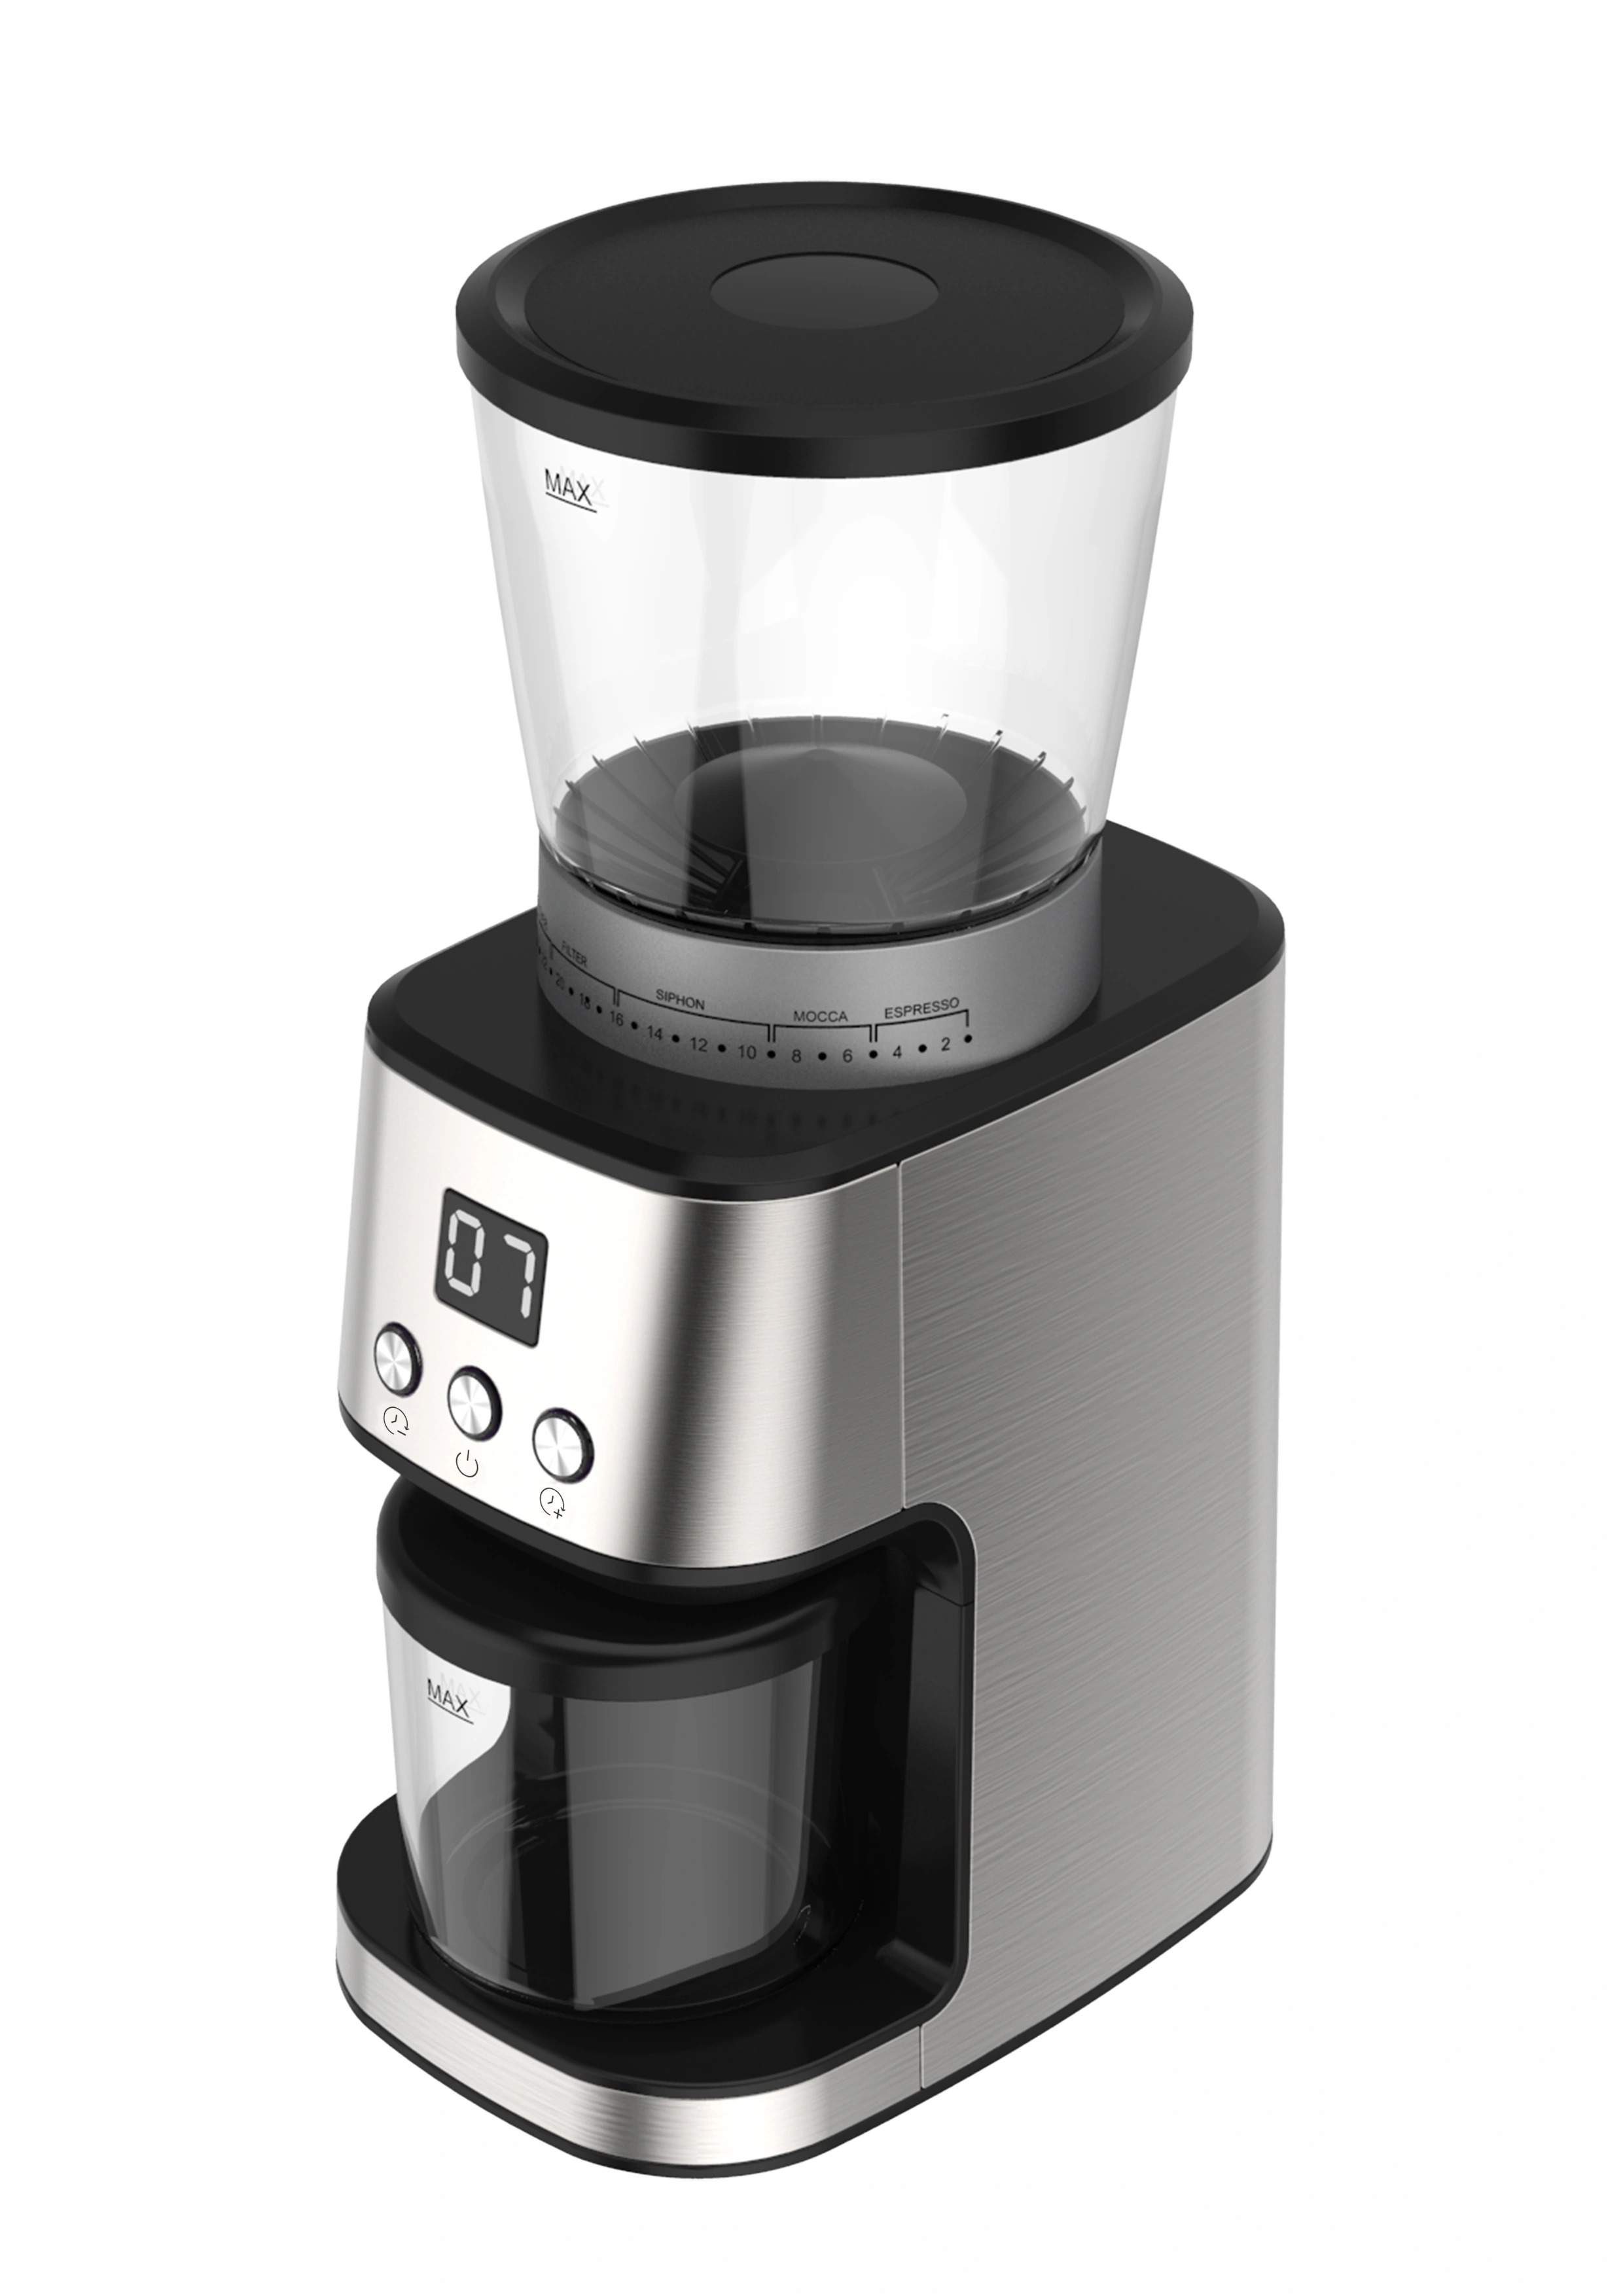 The new model of coffee grinder 